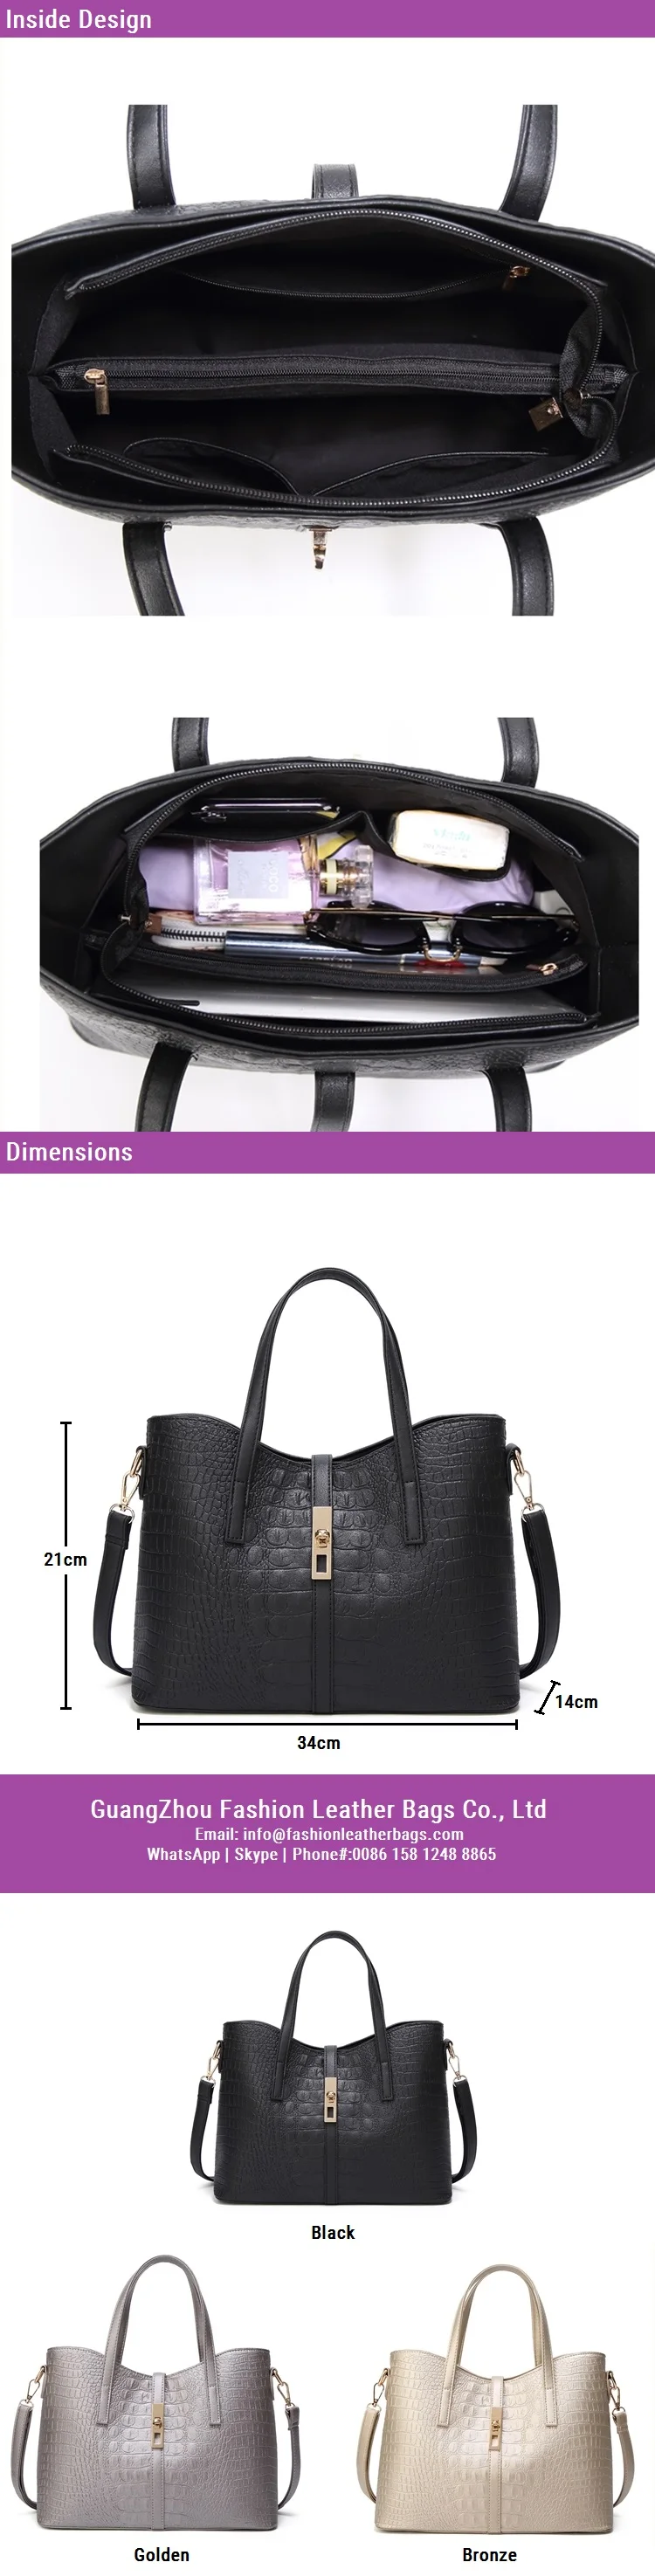 China Bag Manufacturer,Crocodile Tote Handbags From Chinese ...